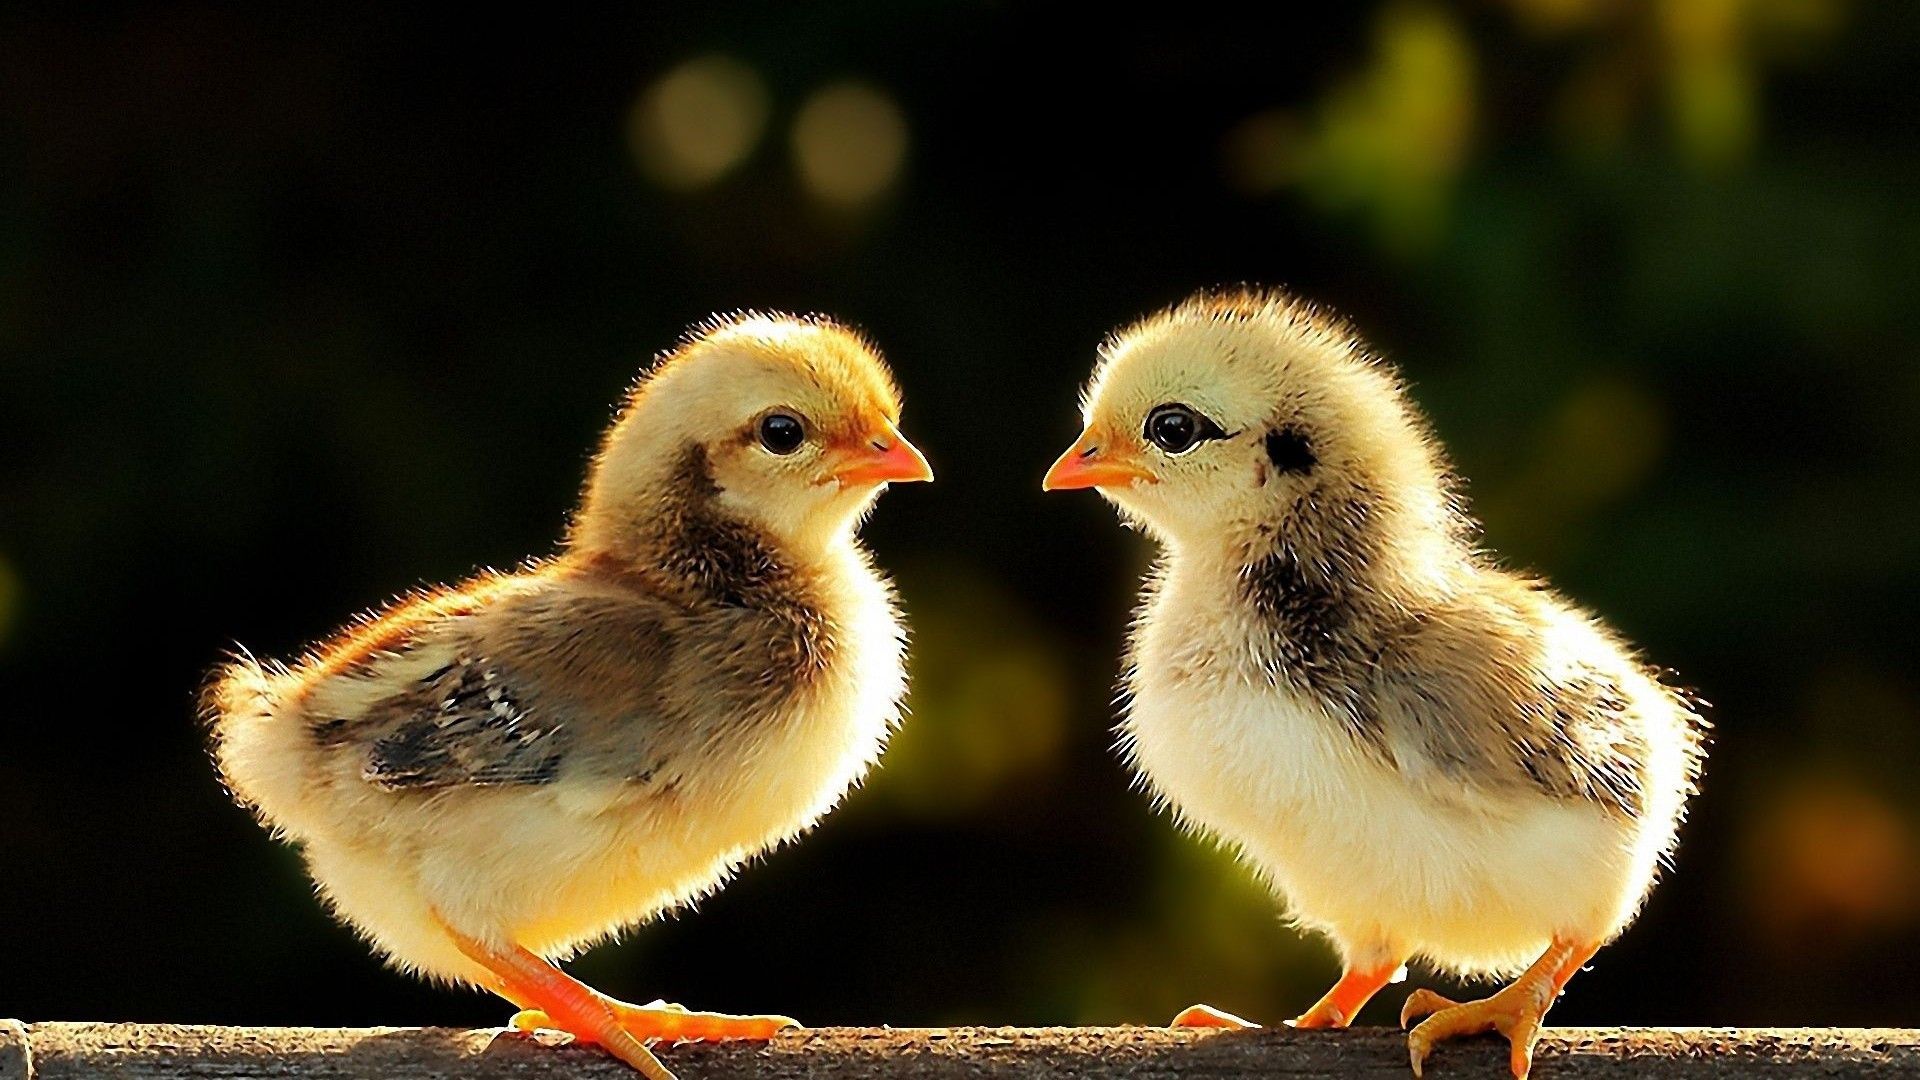 Free download 47 Baby Chicks Wallpaper [1920x1080] for your Desktop, Mobile & Tablet. Explore Chick Wallpaper. Easter Chick Wallpaper, Chick Wallpaper, Free Chick Wallpaper